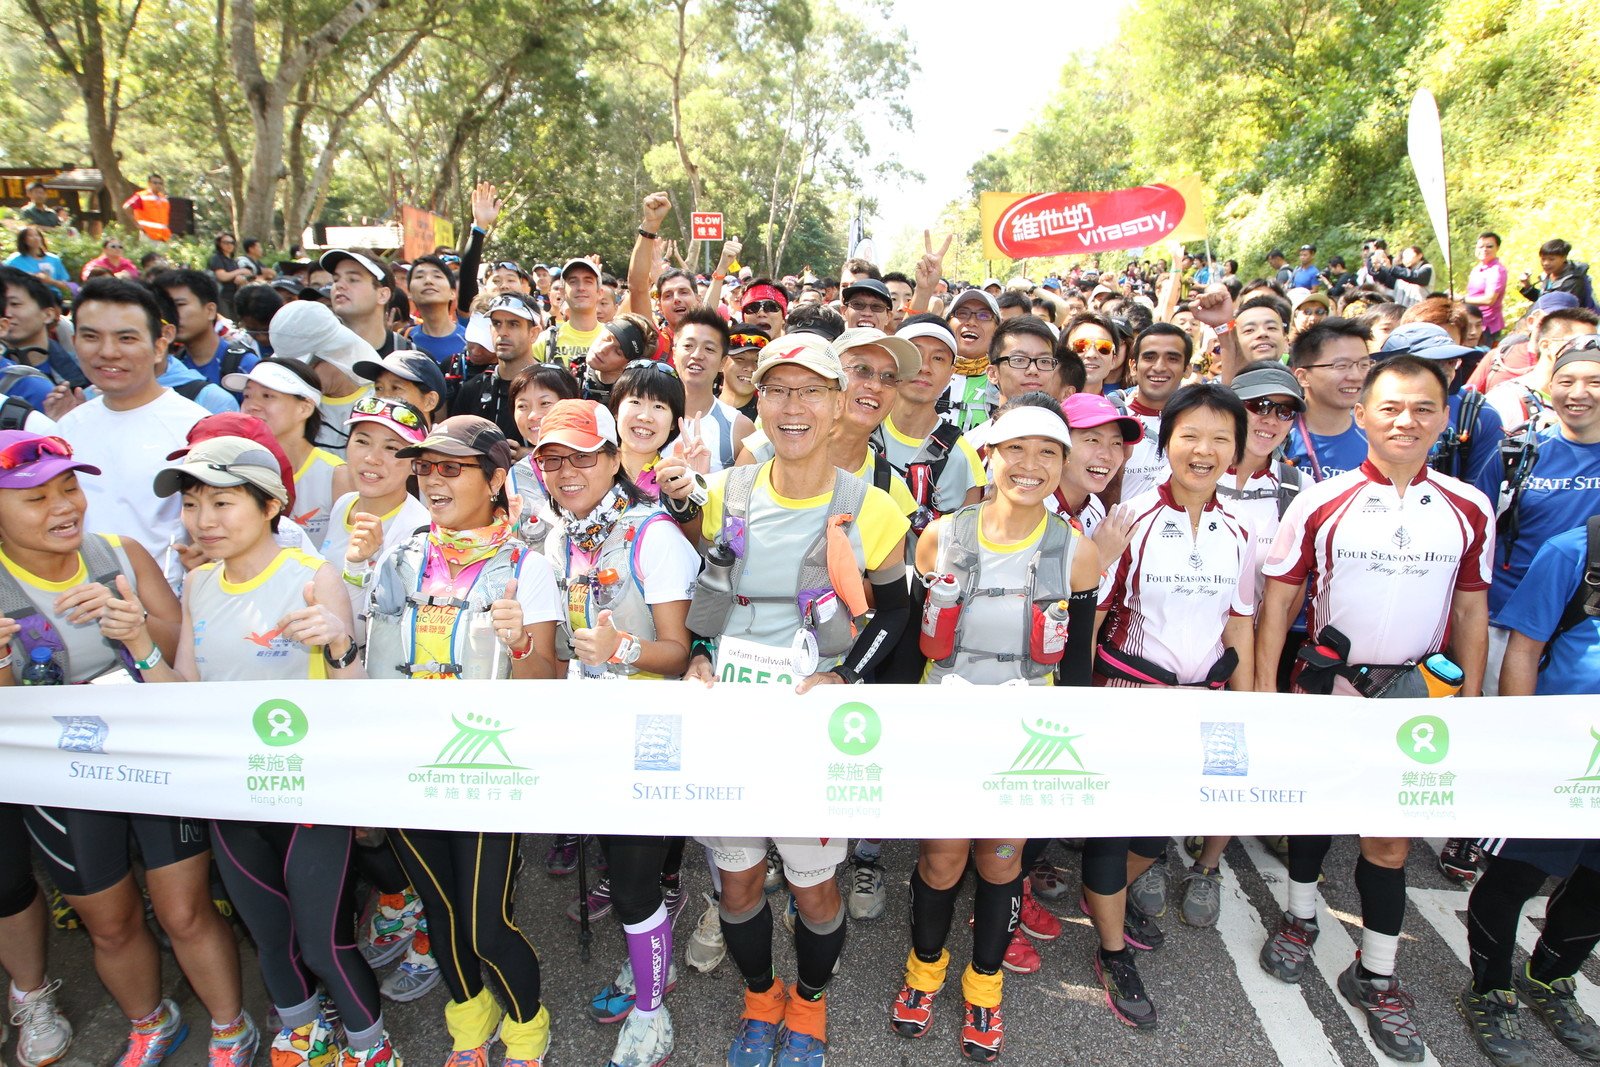 4,800 walkers of Oxfam Trailwalker 2013 will take the 100 km challenge along the MacLehose Trail and other trail in teams of four within 48 hours.